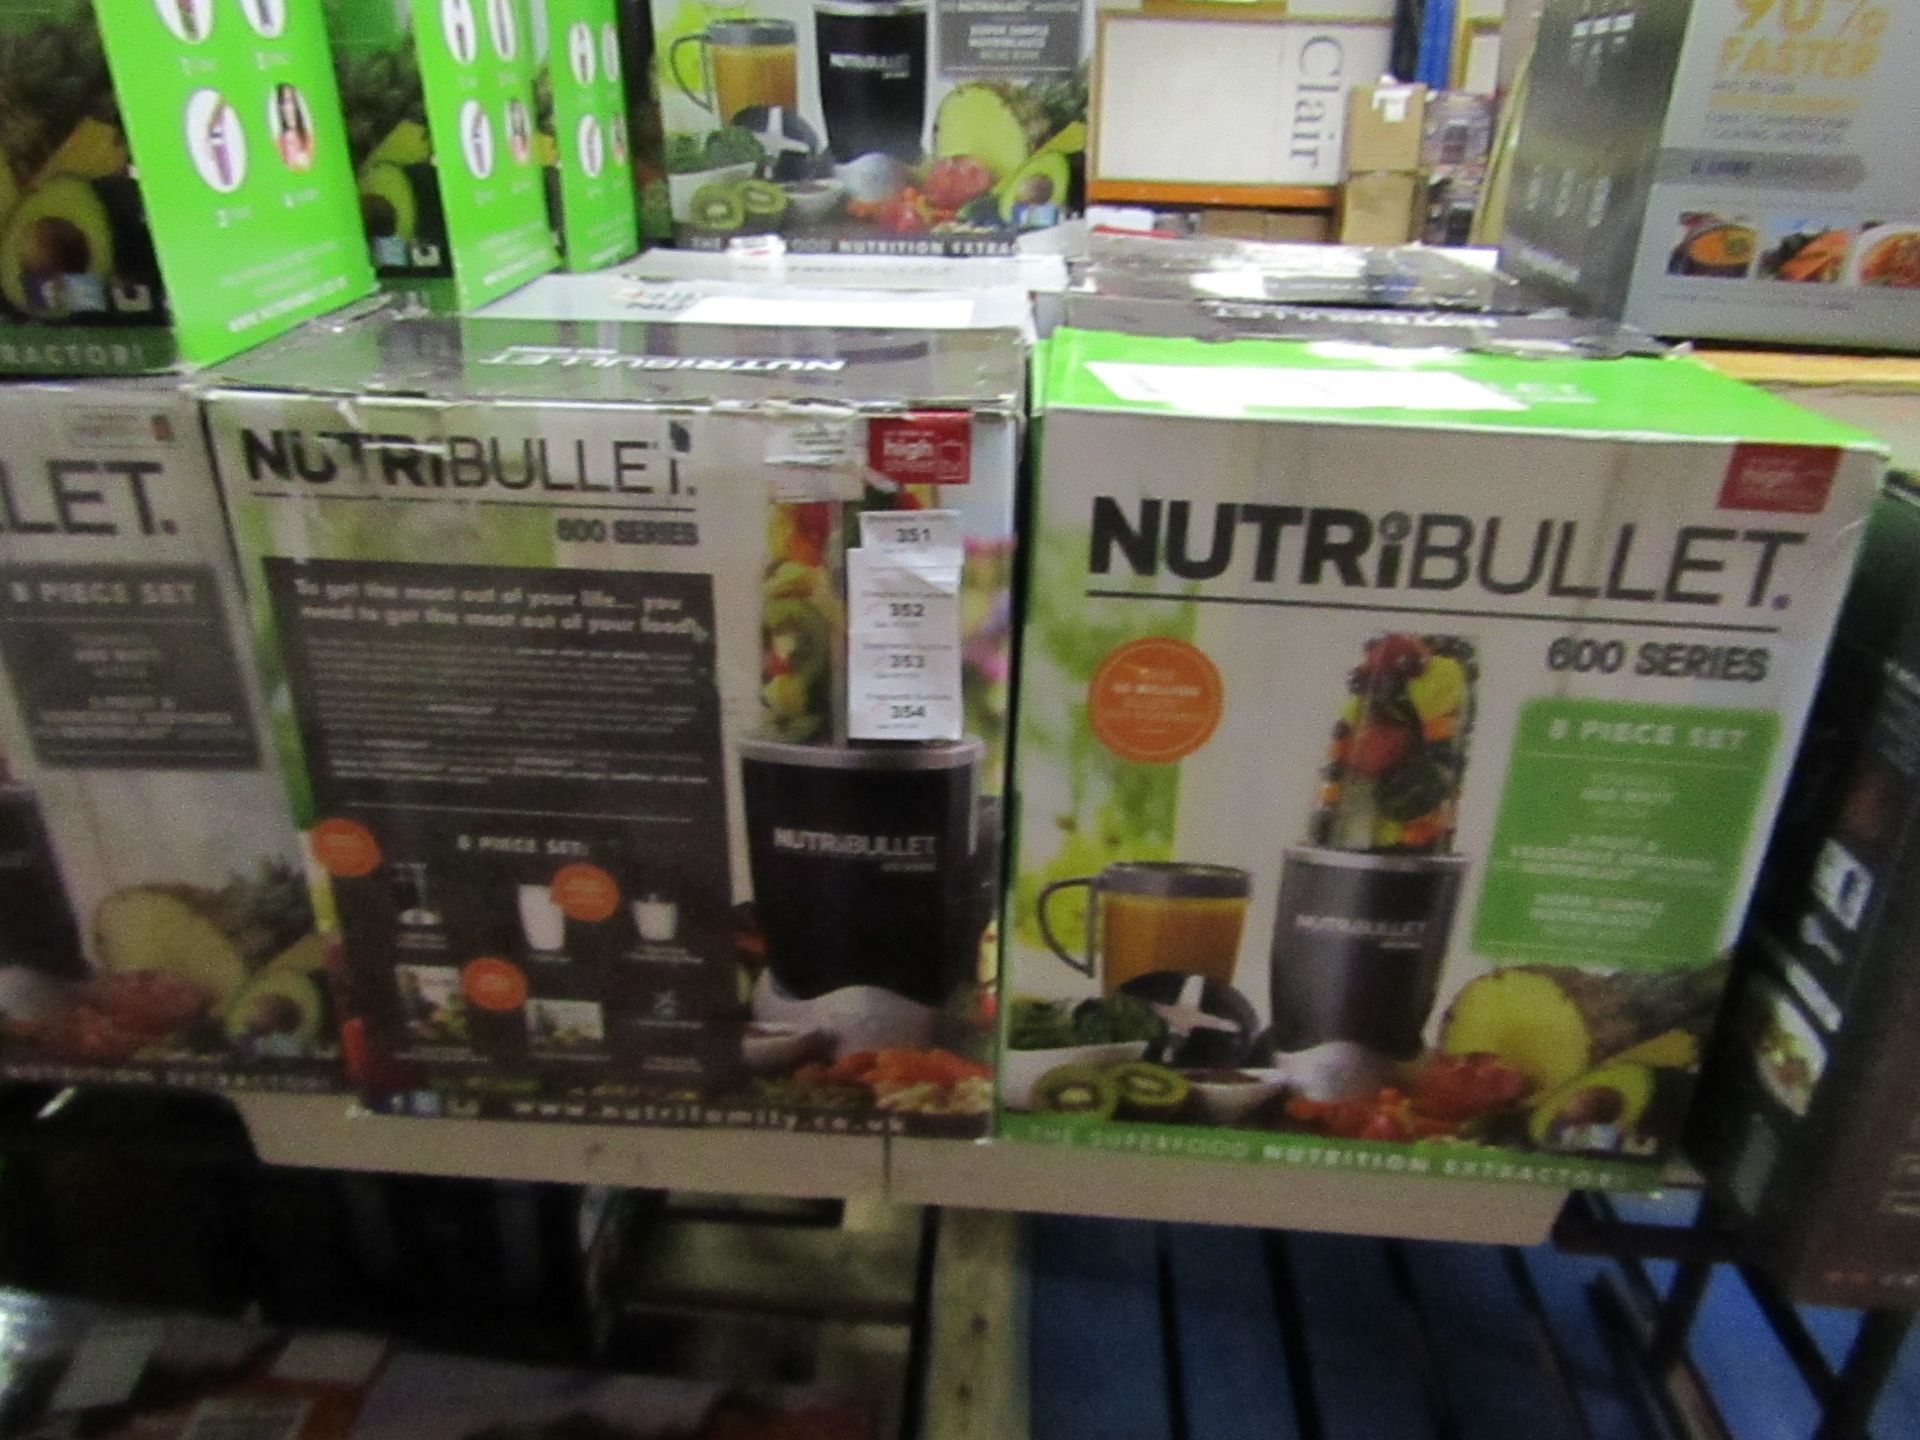 | 2X | NUTRI BULLET 600 SERIES | UNCHECKED AND BOXED | NO ONLINE RE-SALE | SKU C5060191462198 |